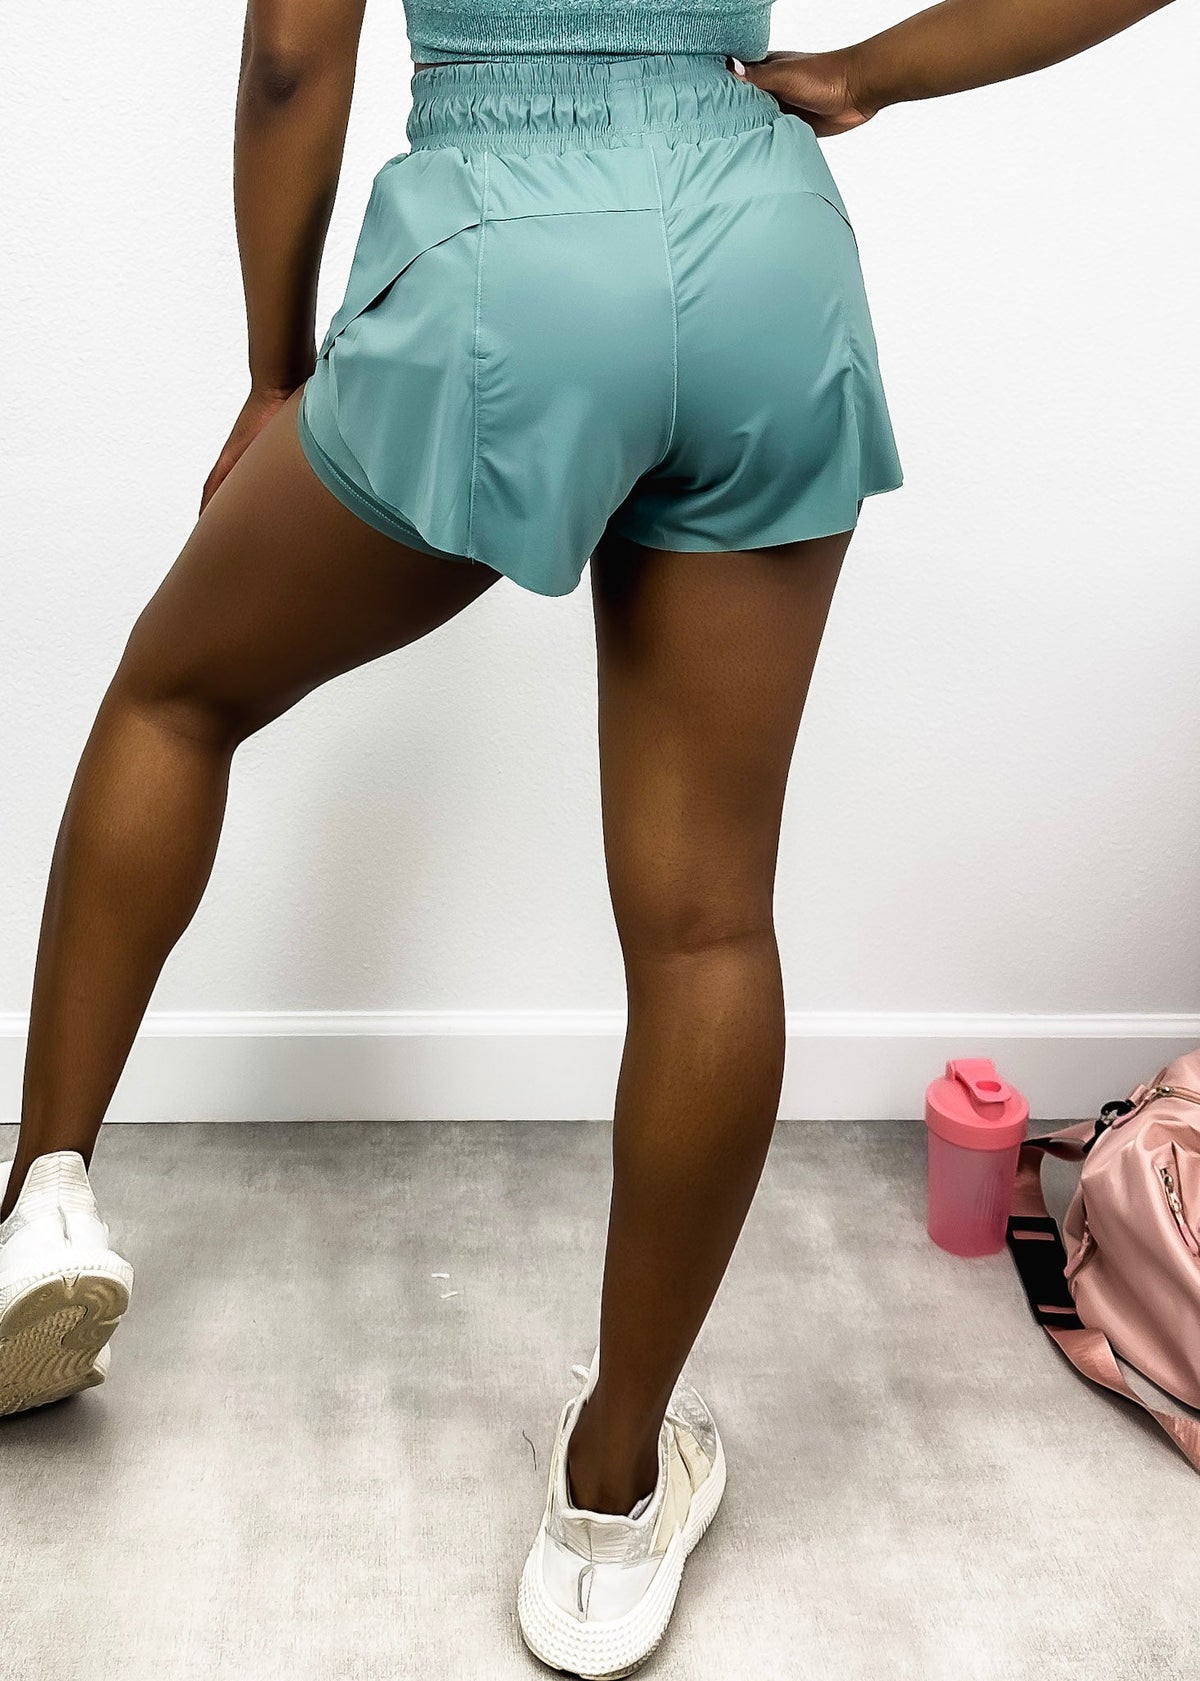 Active shorts for runners